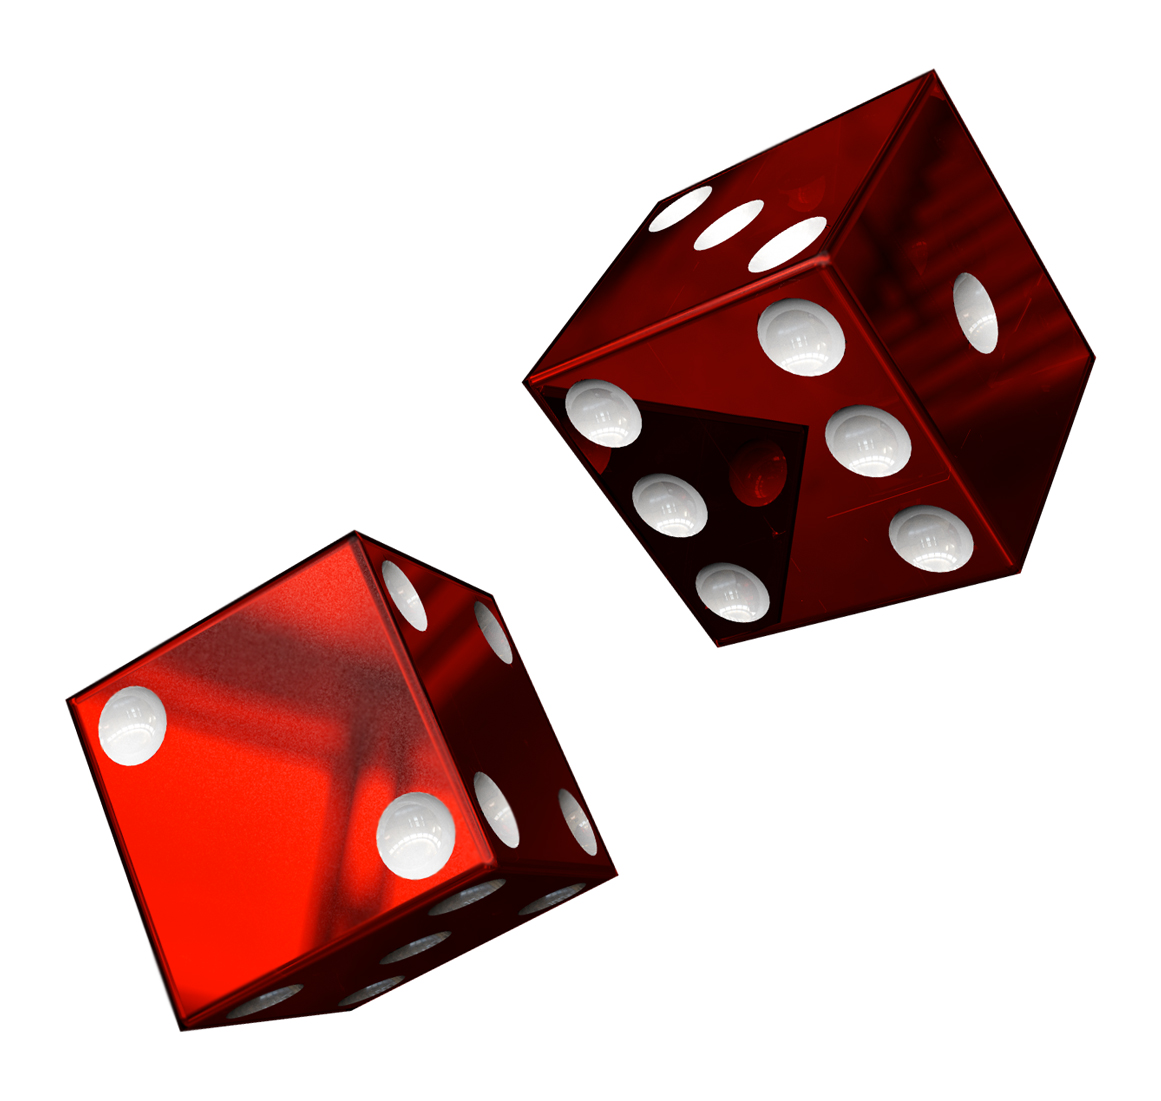 Two Red Dice | The Heroic Stoic